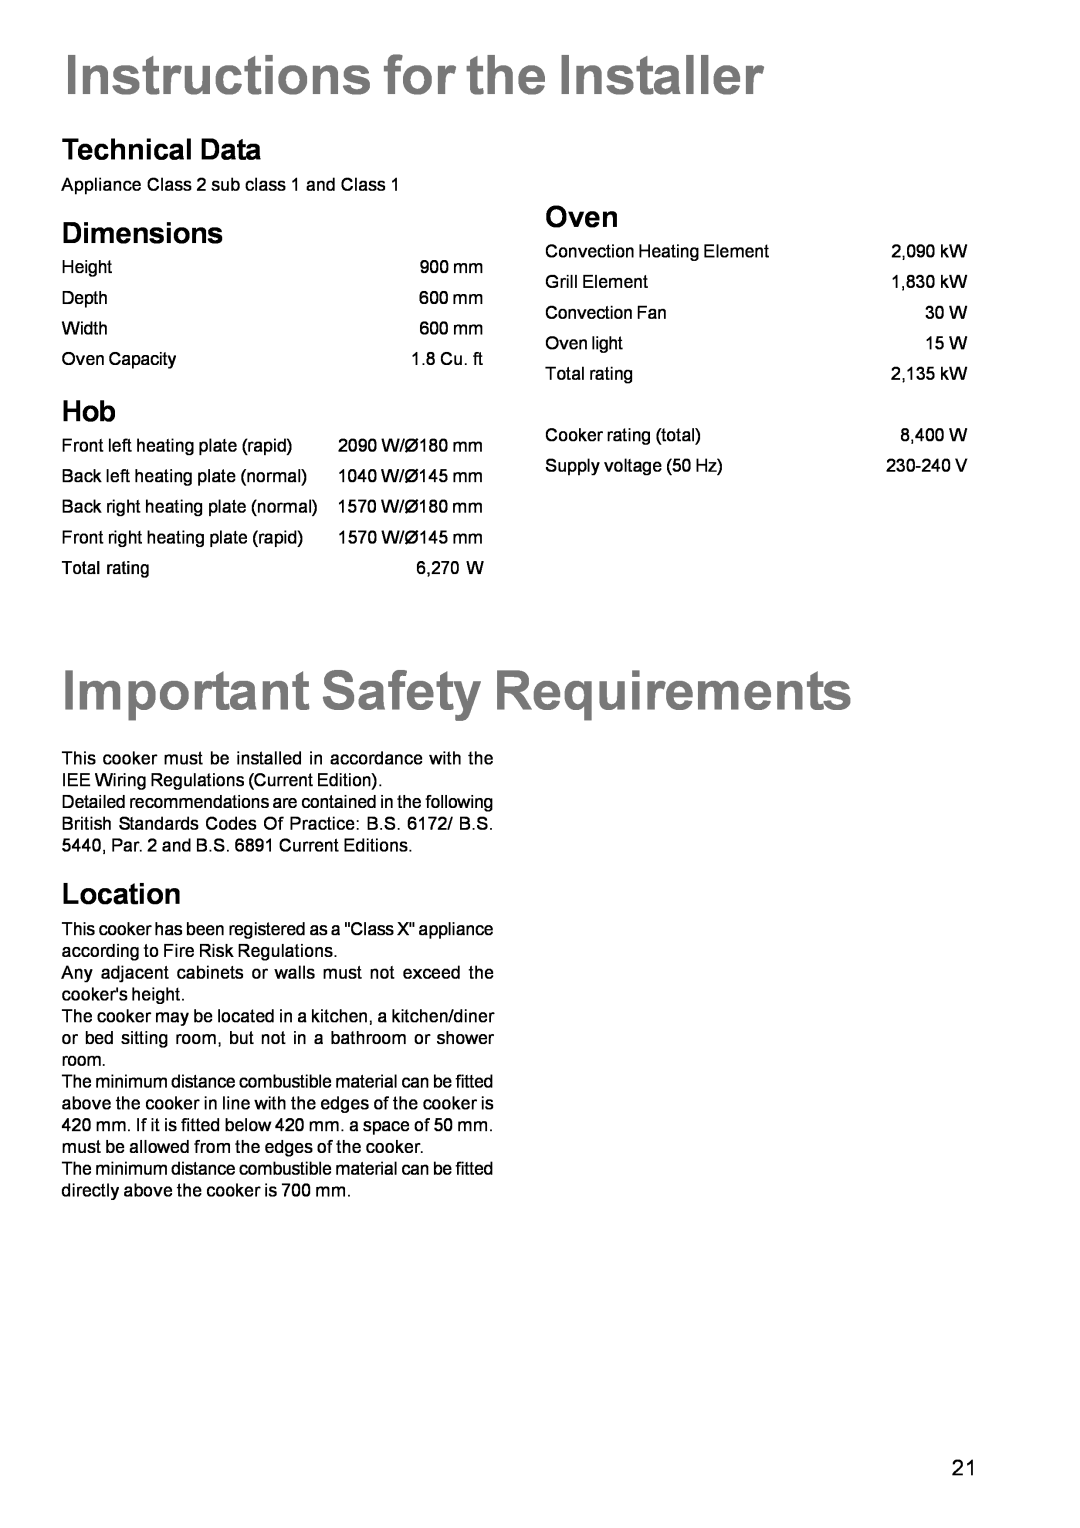 Zanussi ZCE 611 Instructions for the Installer, Important Safety Requirements, Technical Data, Dimensions, Oven, Location 